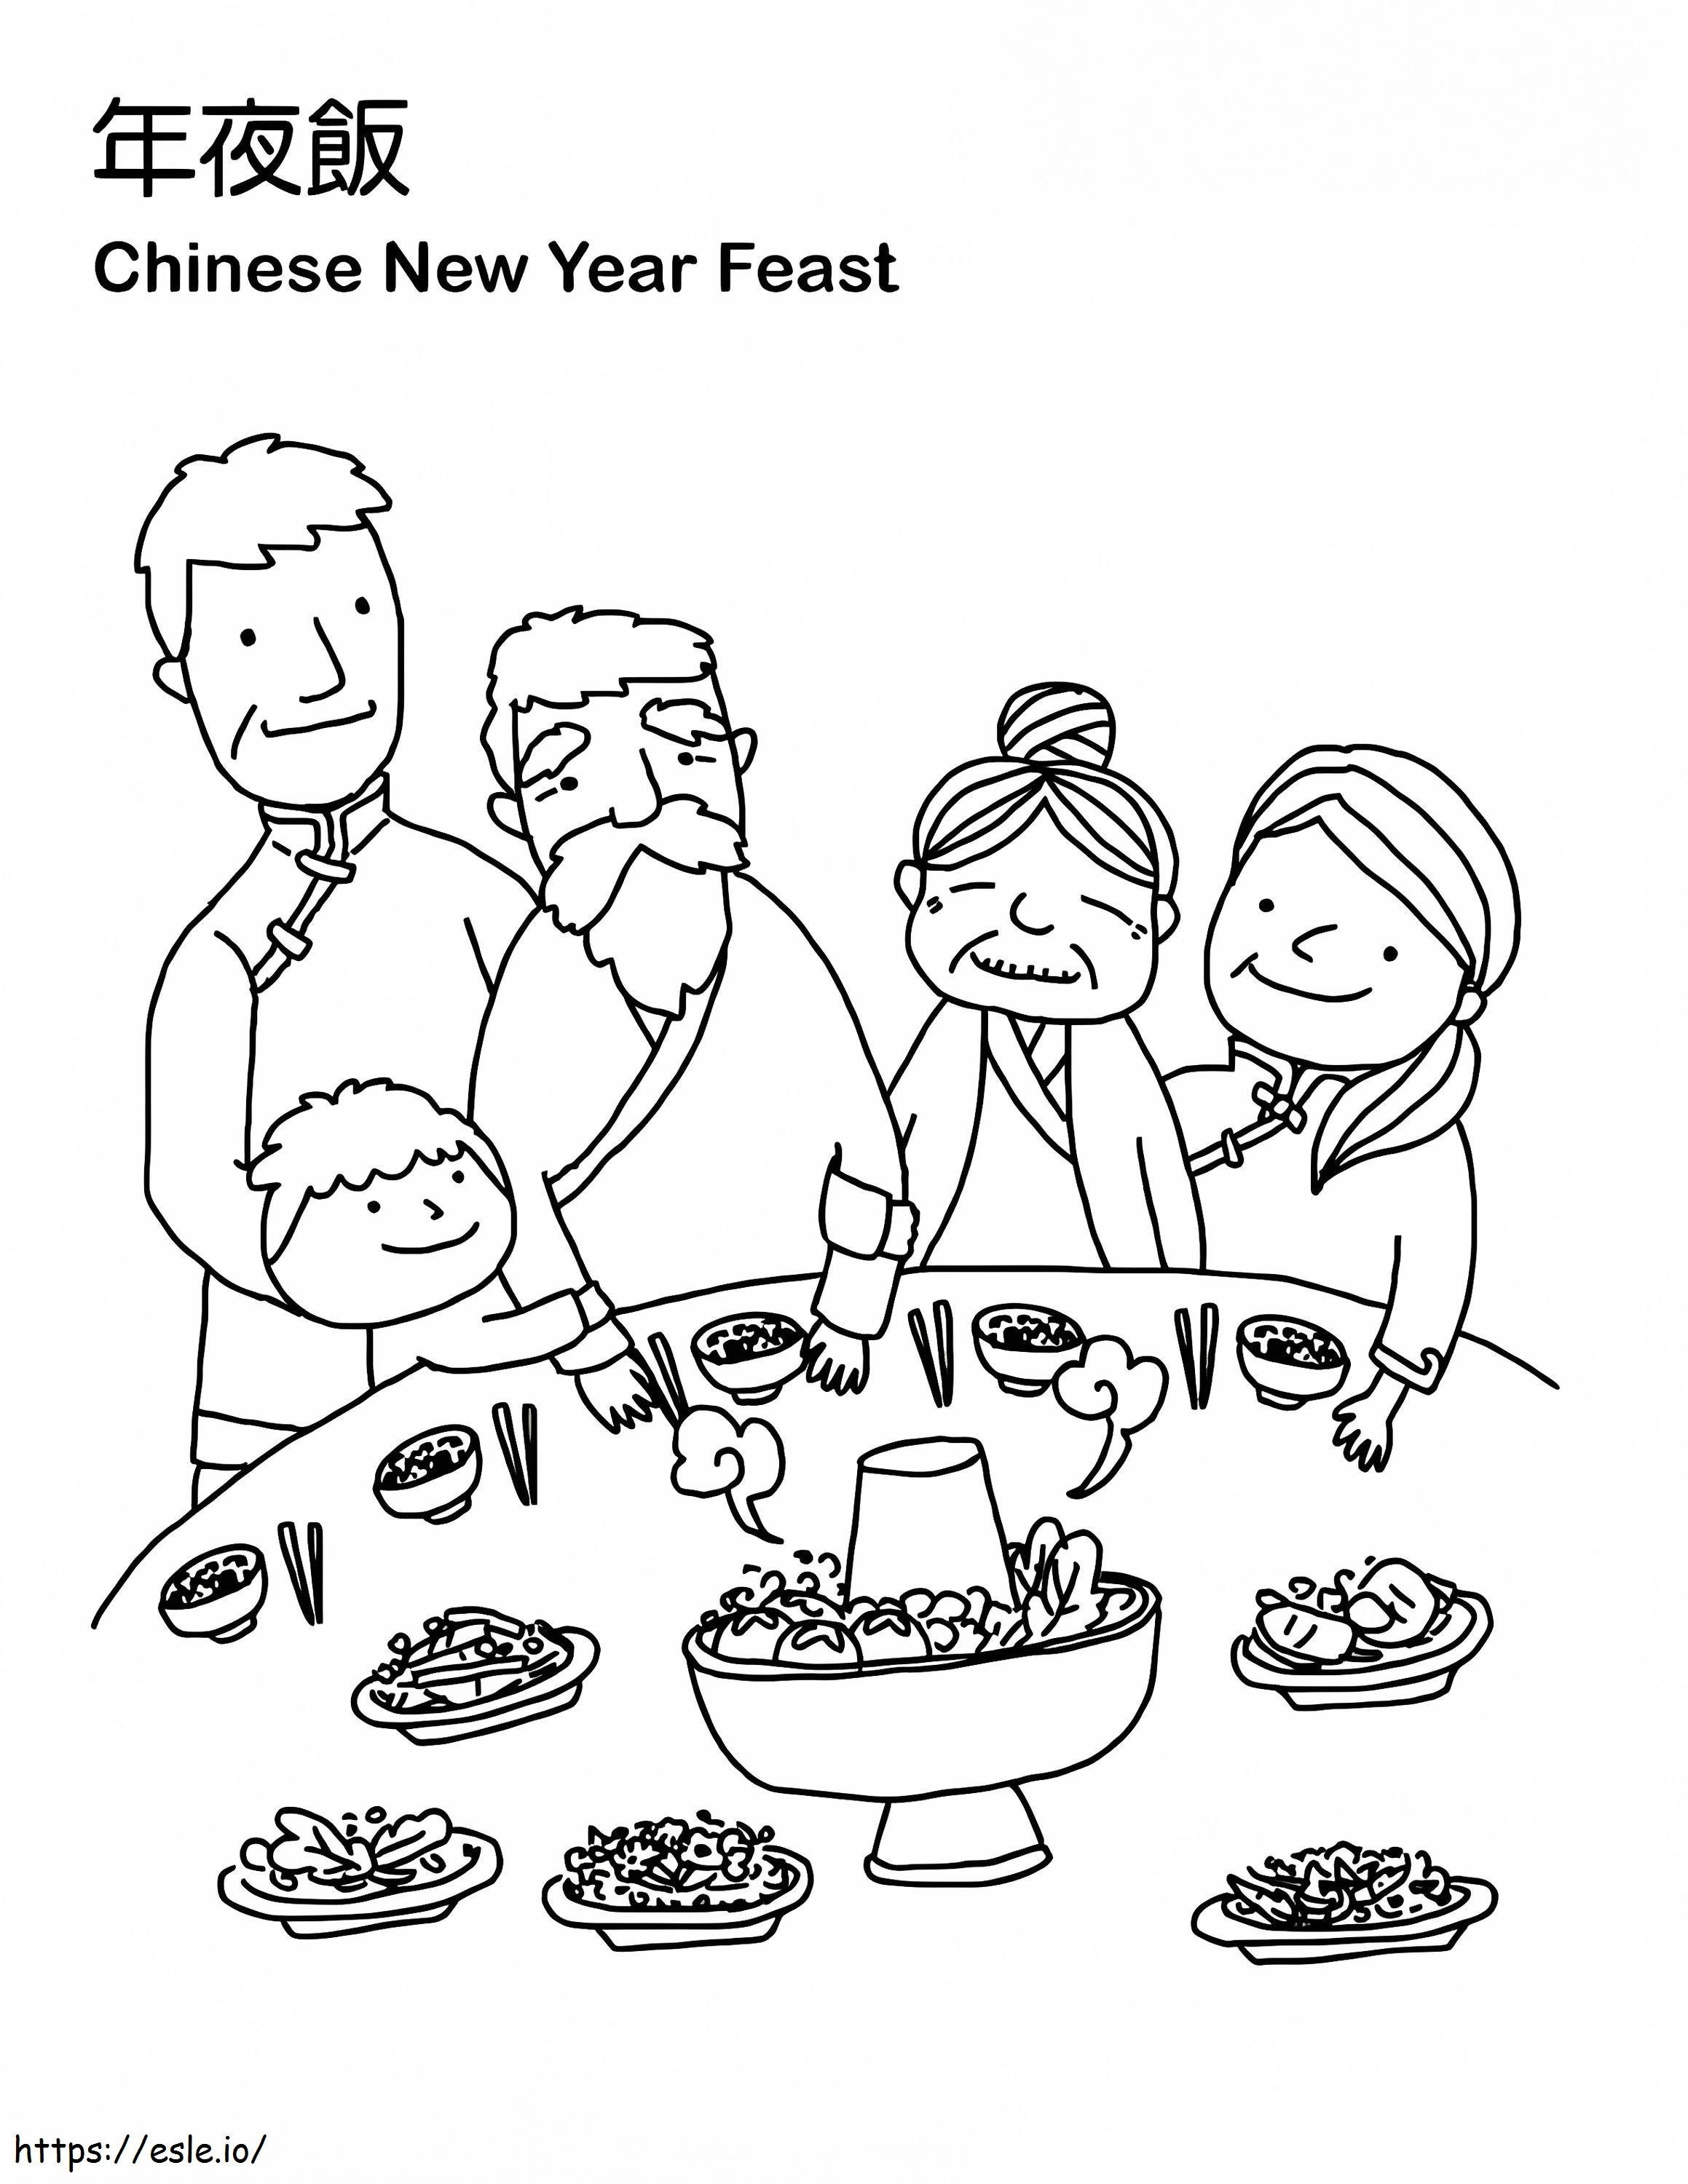 Chinese New Year Feast coloring page